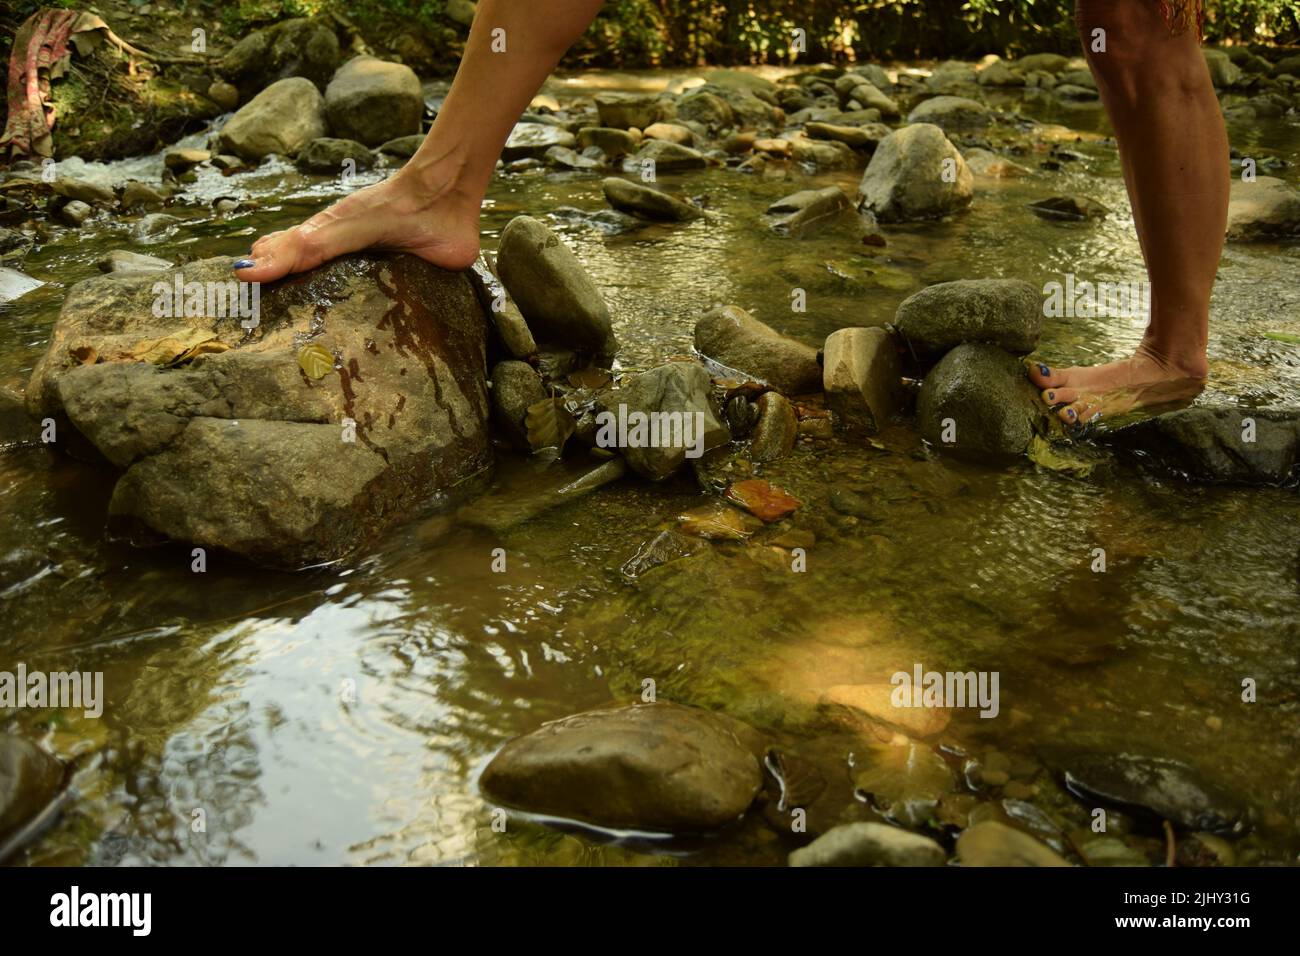 A barefoot woman taking a step towards a rock while walking in a clean brook water, with rocks and stones around her feet Stock Photo